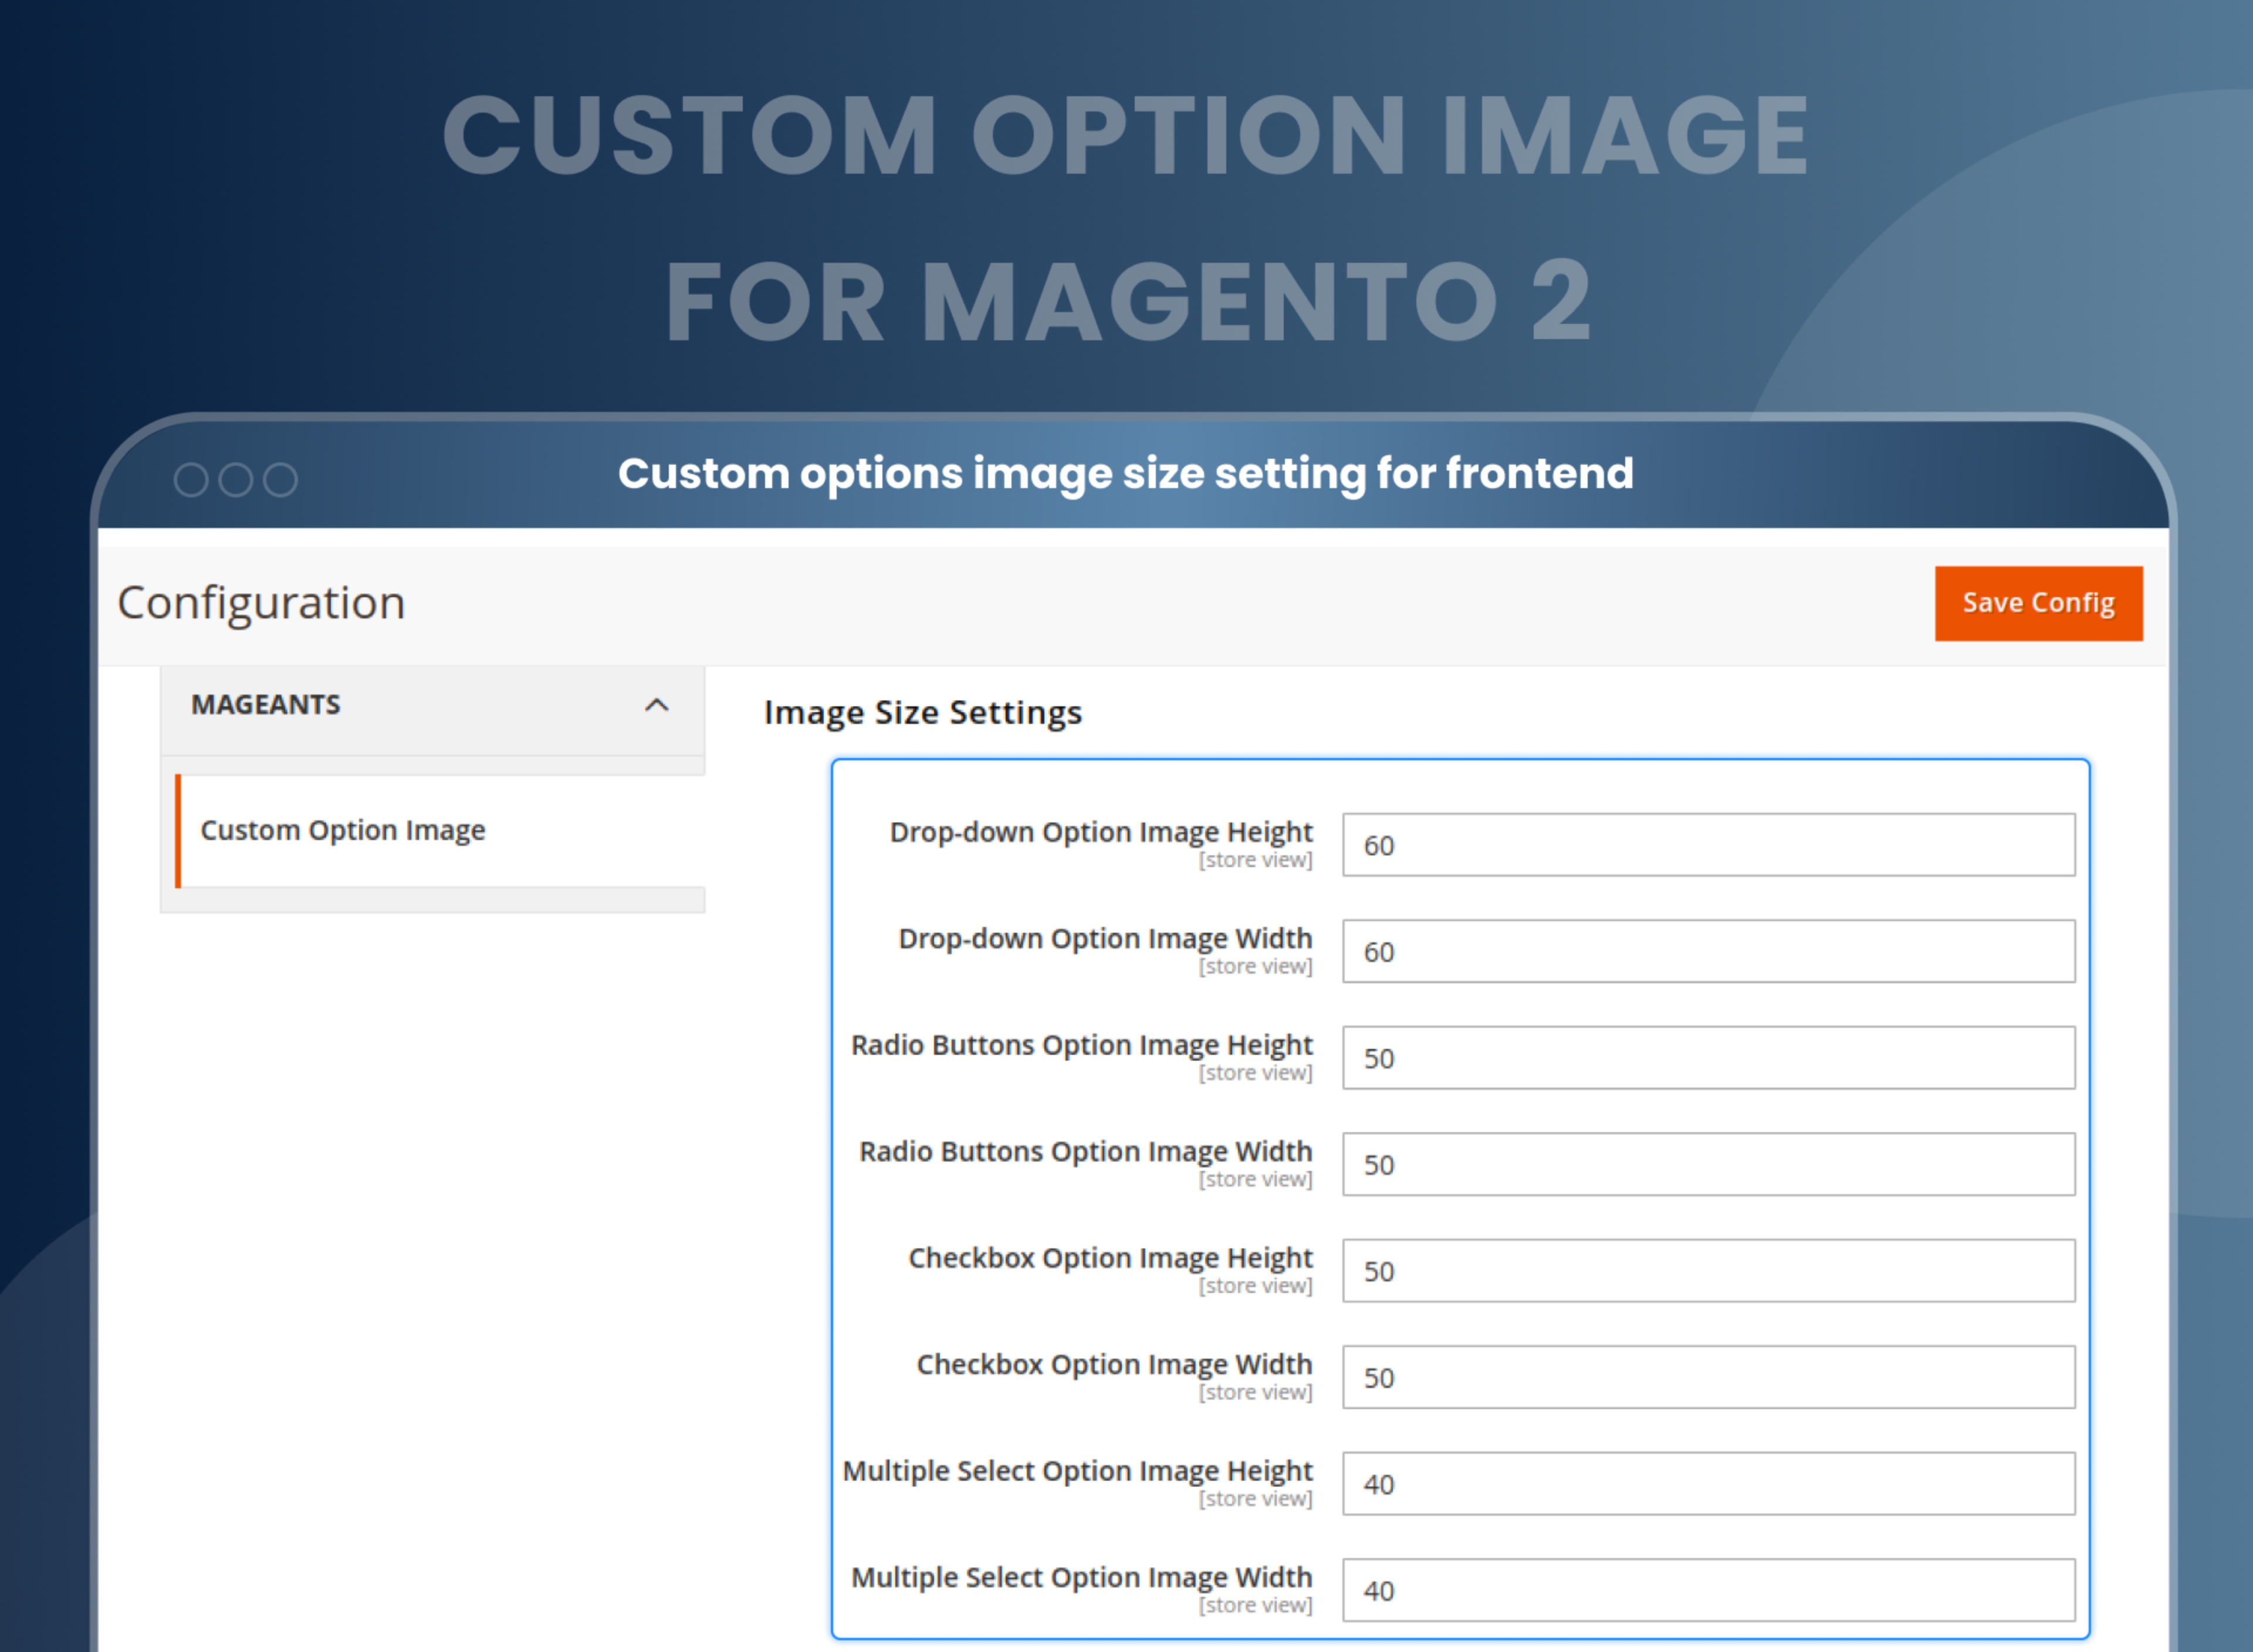 Custom options image size setting for frontend